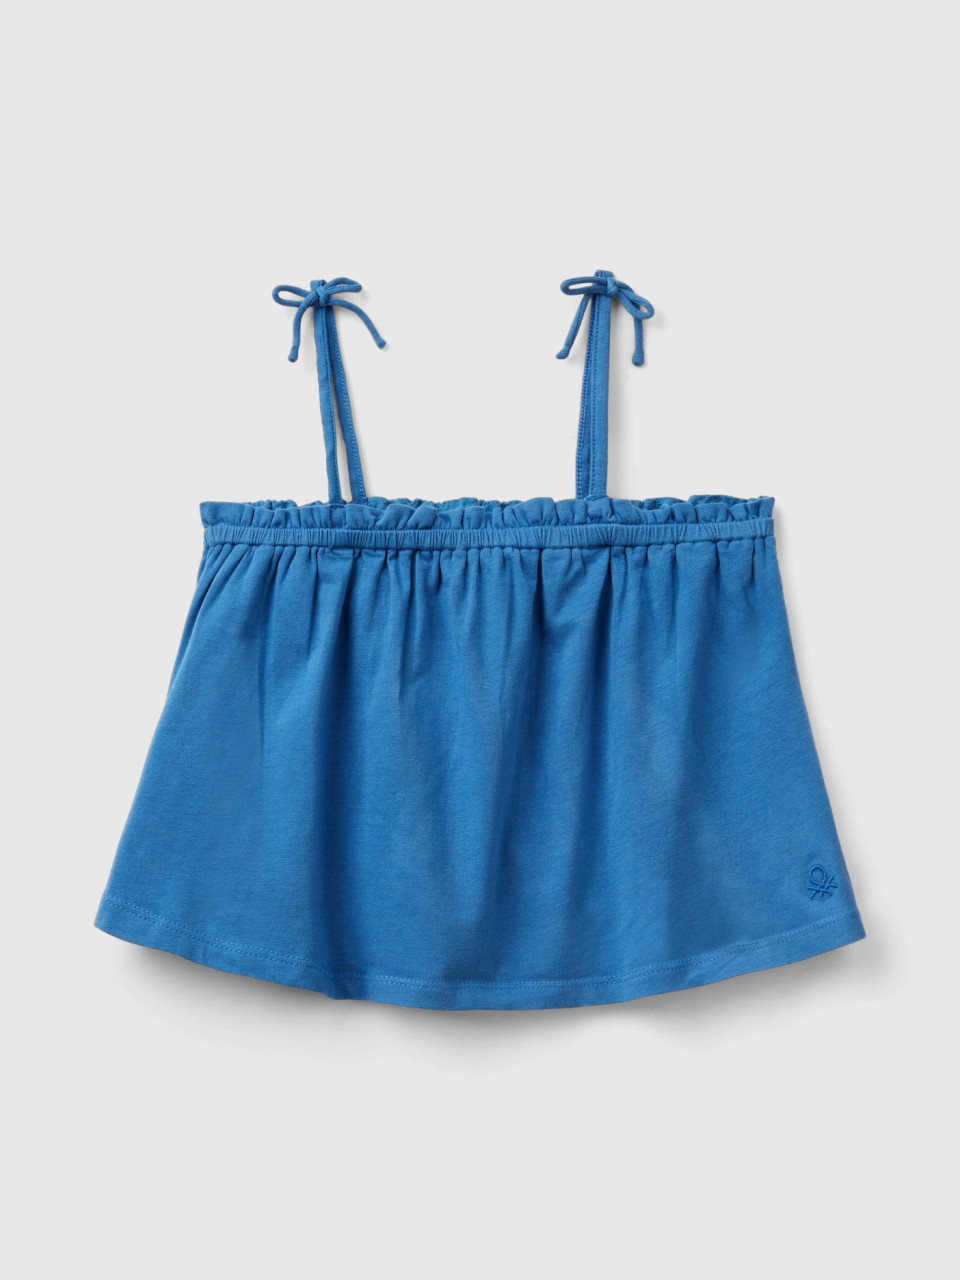 Benetton, Top With Broderie Anglaise Details, Blue, Kids